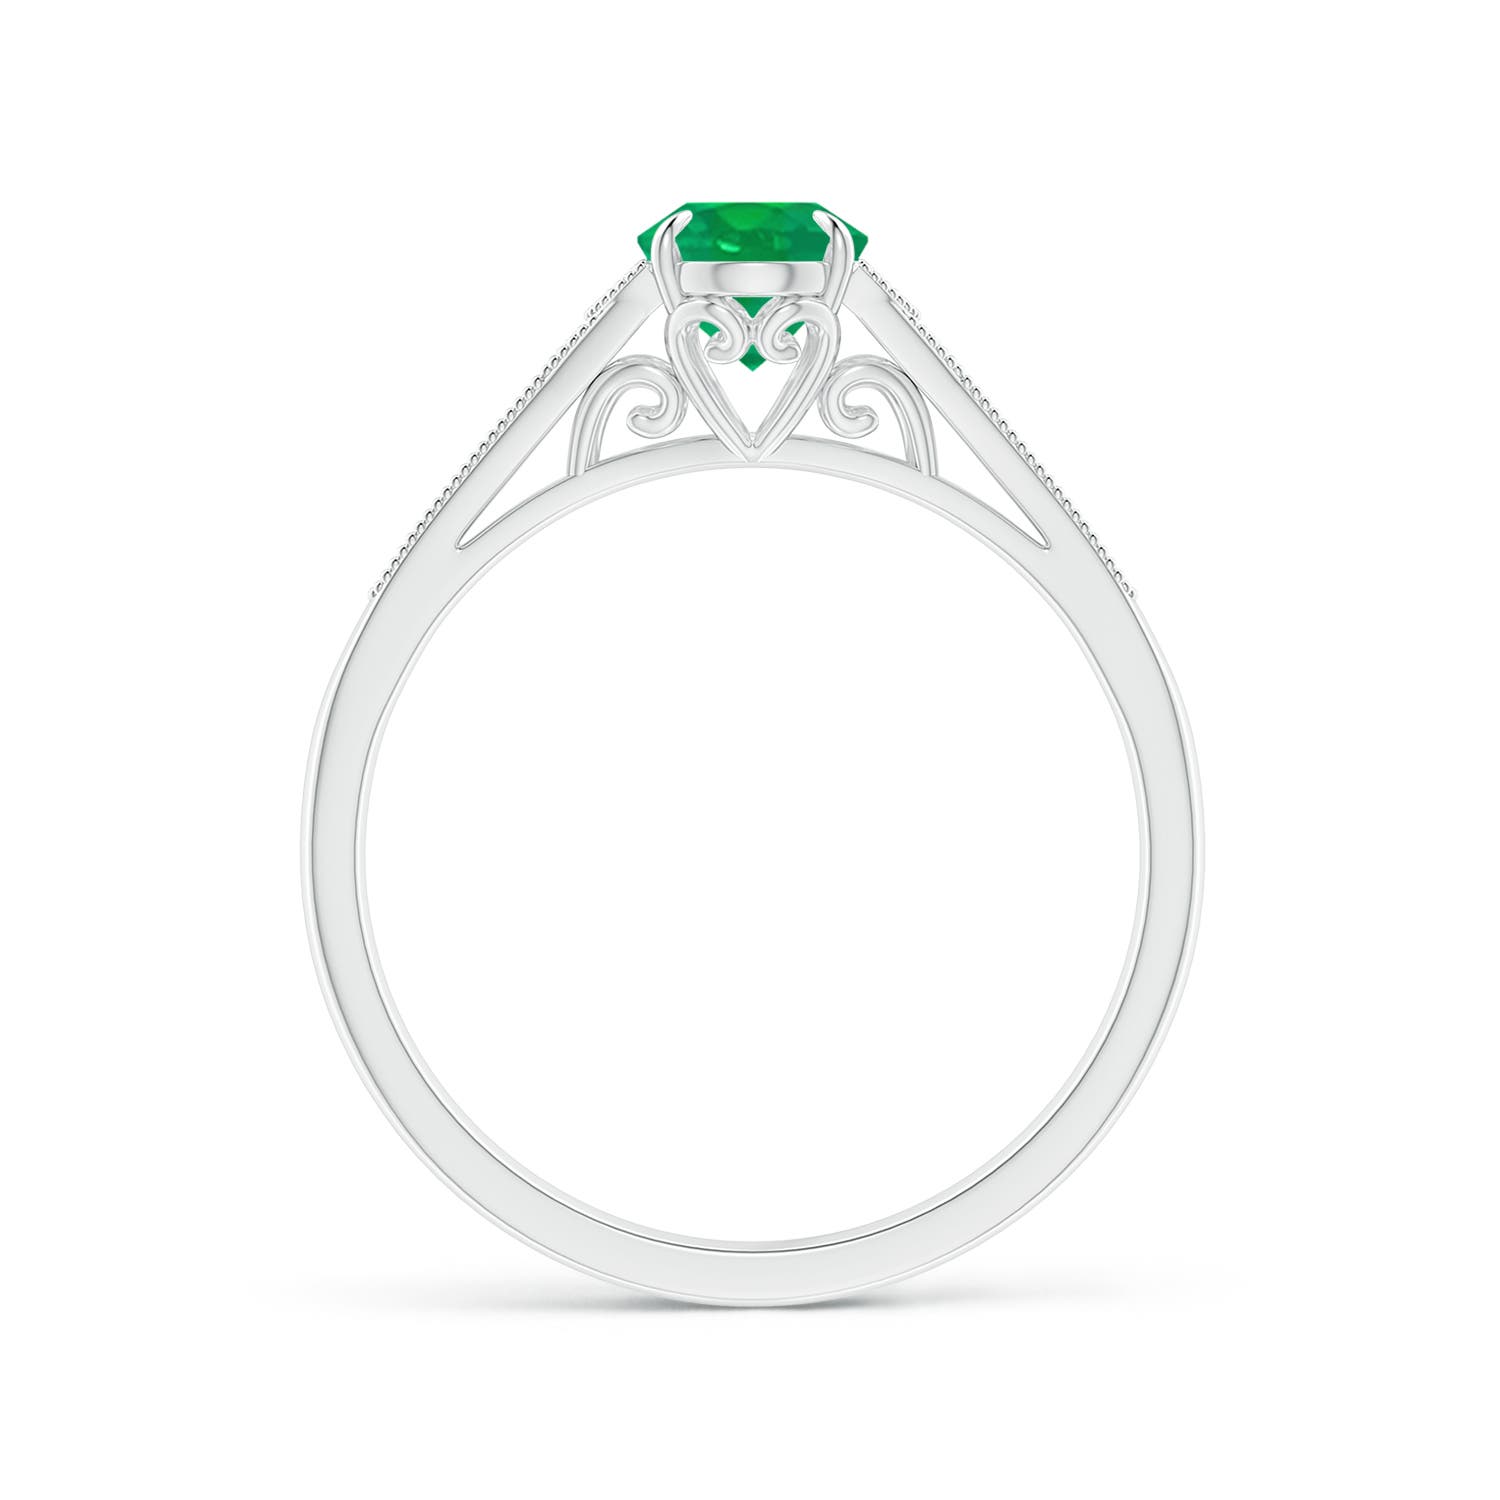 AA - Emerald / 0.77 CT / 14 KT White Gold